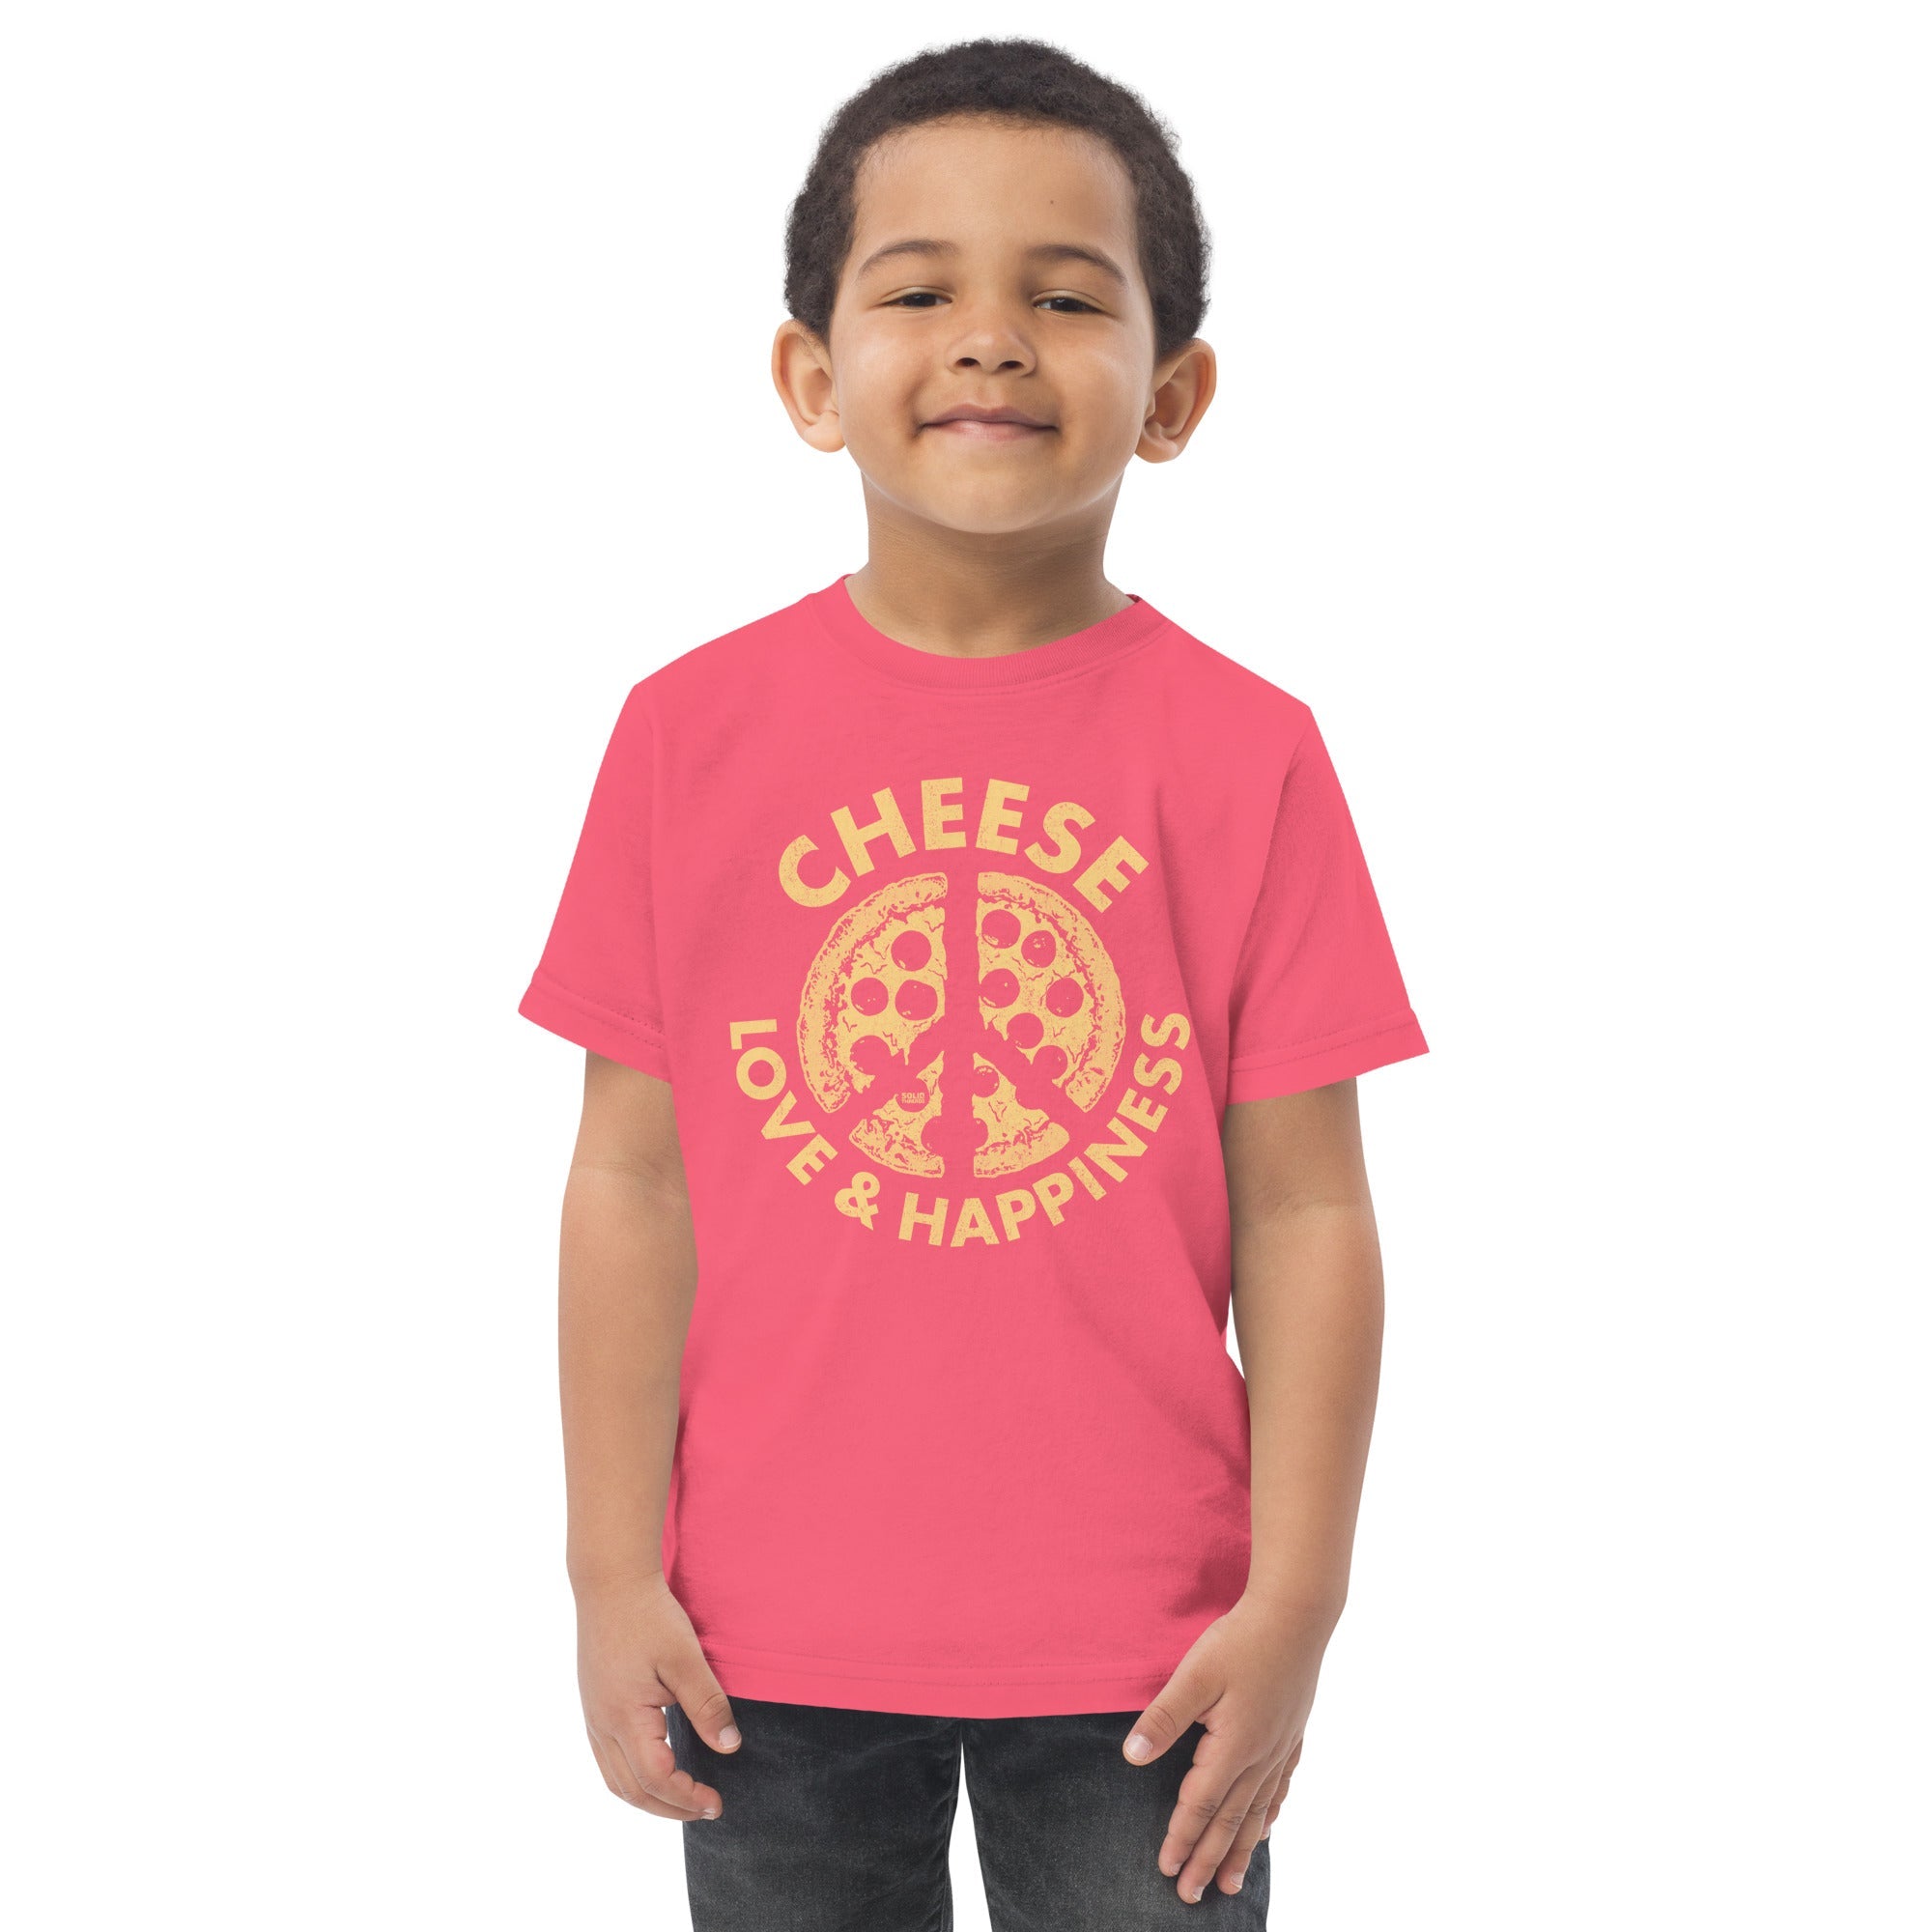 Toddler's Cheese Love Happiness Funny Extra Soft T-Shirt | Retro Pizza Tee On Model | Solid Threads